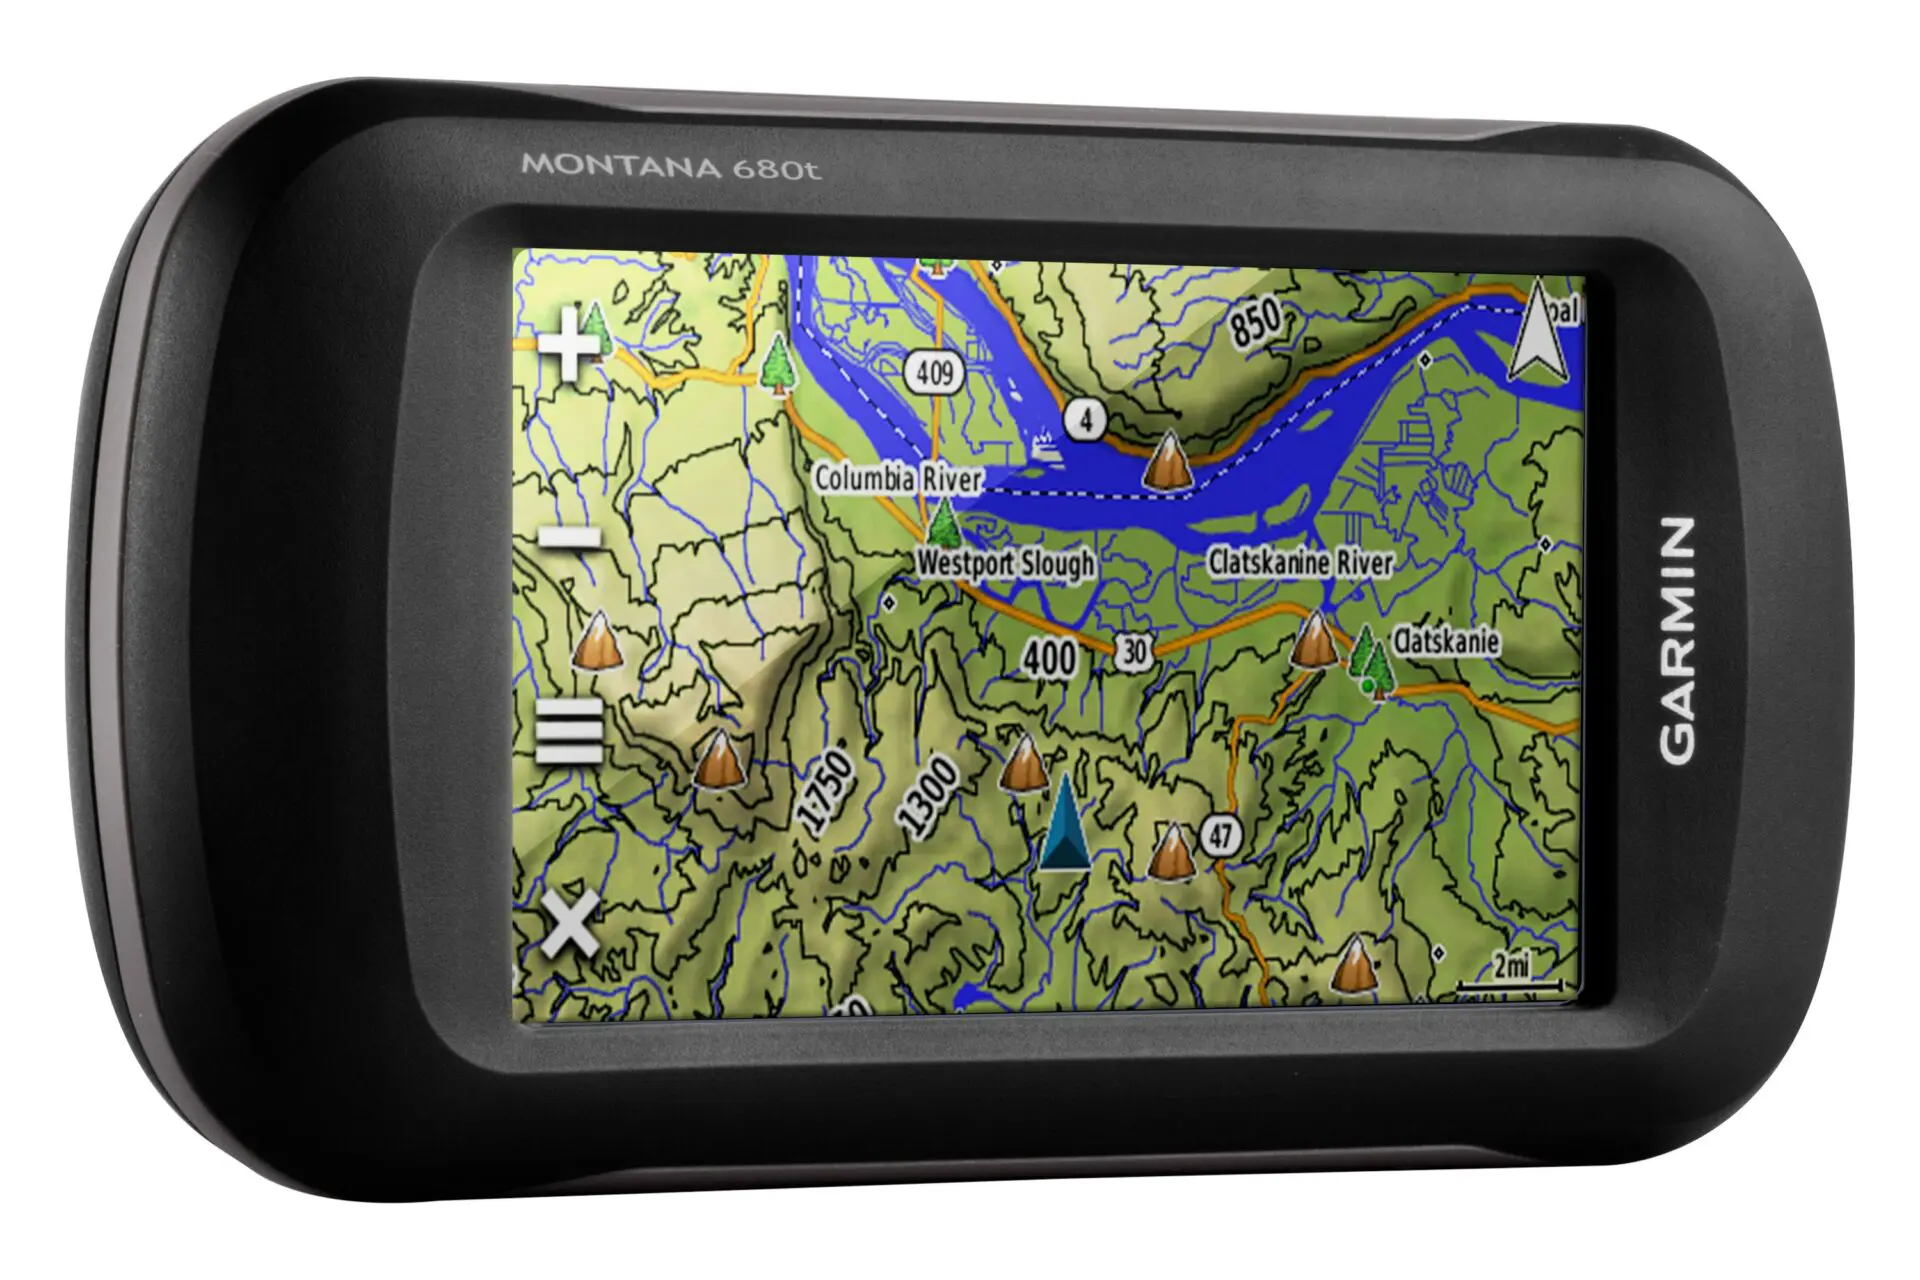 How To Download New Maps To Garmin Nuvi